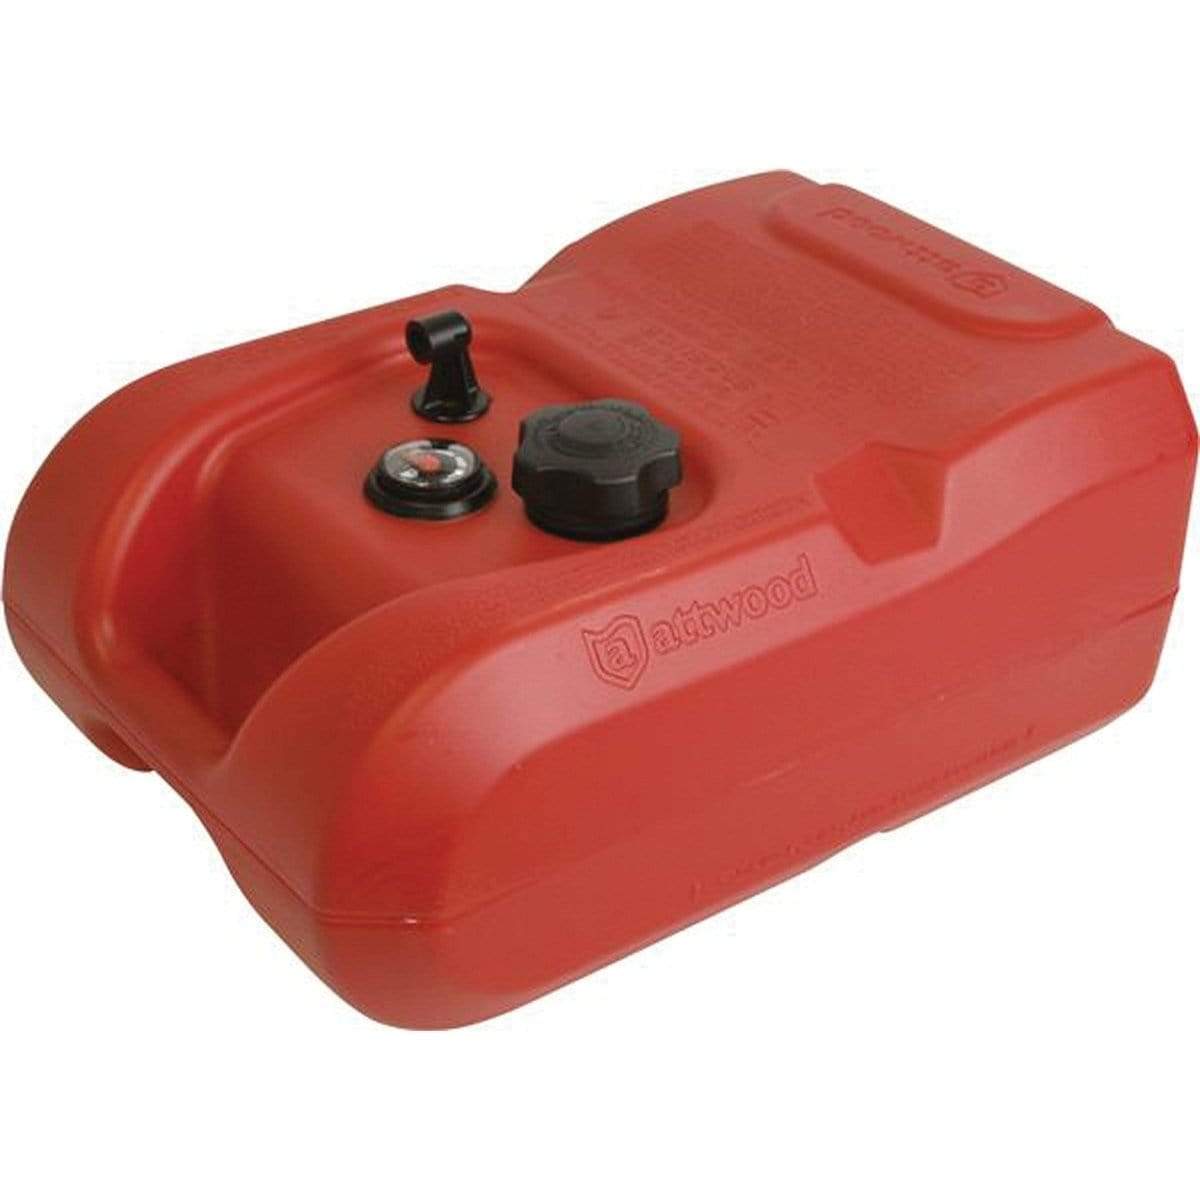 Attwood Marine Qualifies for Free Shipping Attwood 6-Gallon Fuel Tank with Gauge #8806LPG2